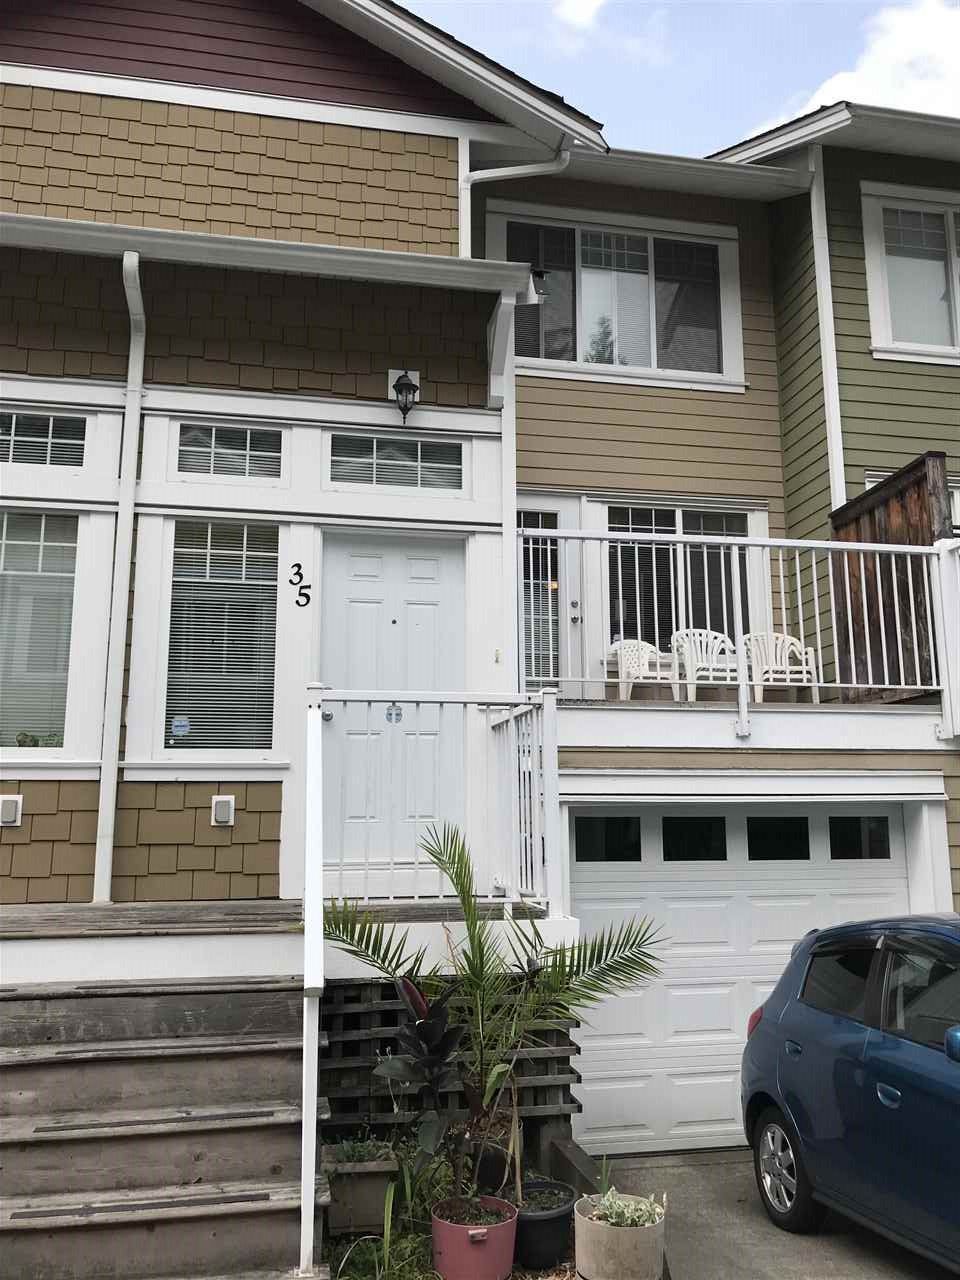 Main Photo: 35 6110 138 Street in Surrey: Sullivan Station Townhouse for sale : MLS®# R2300268